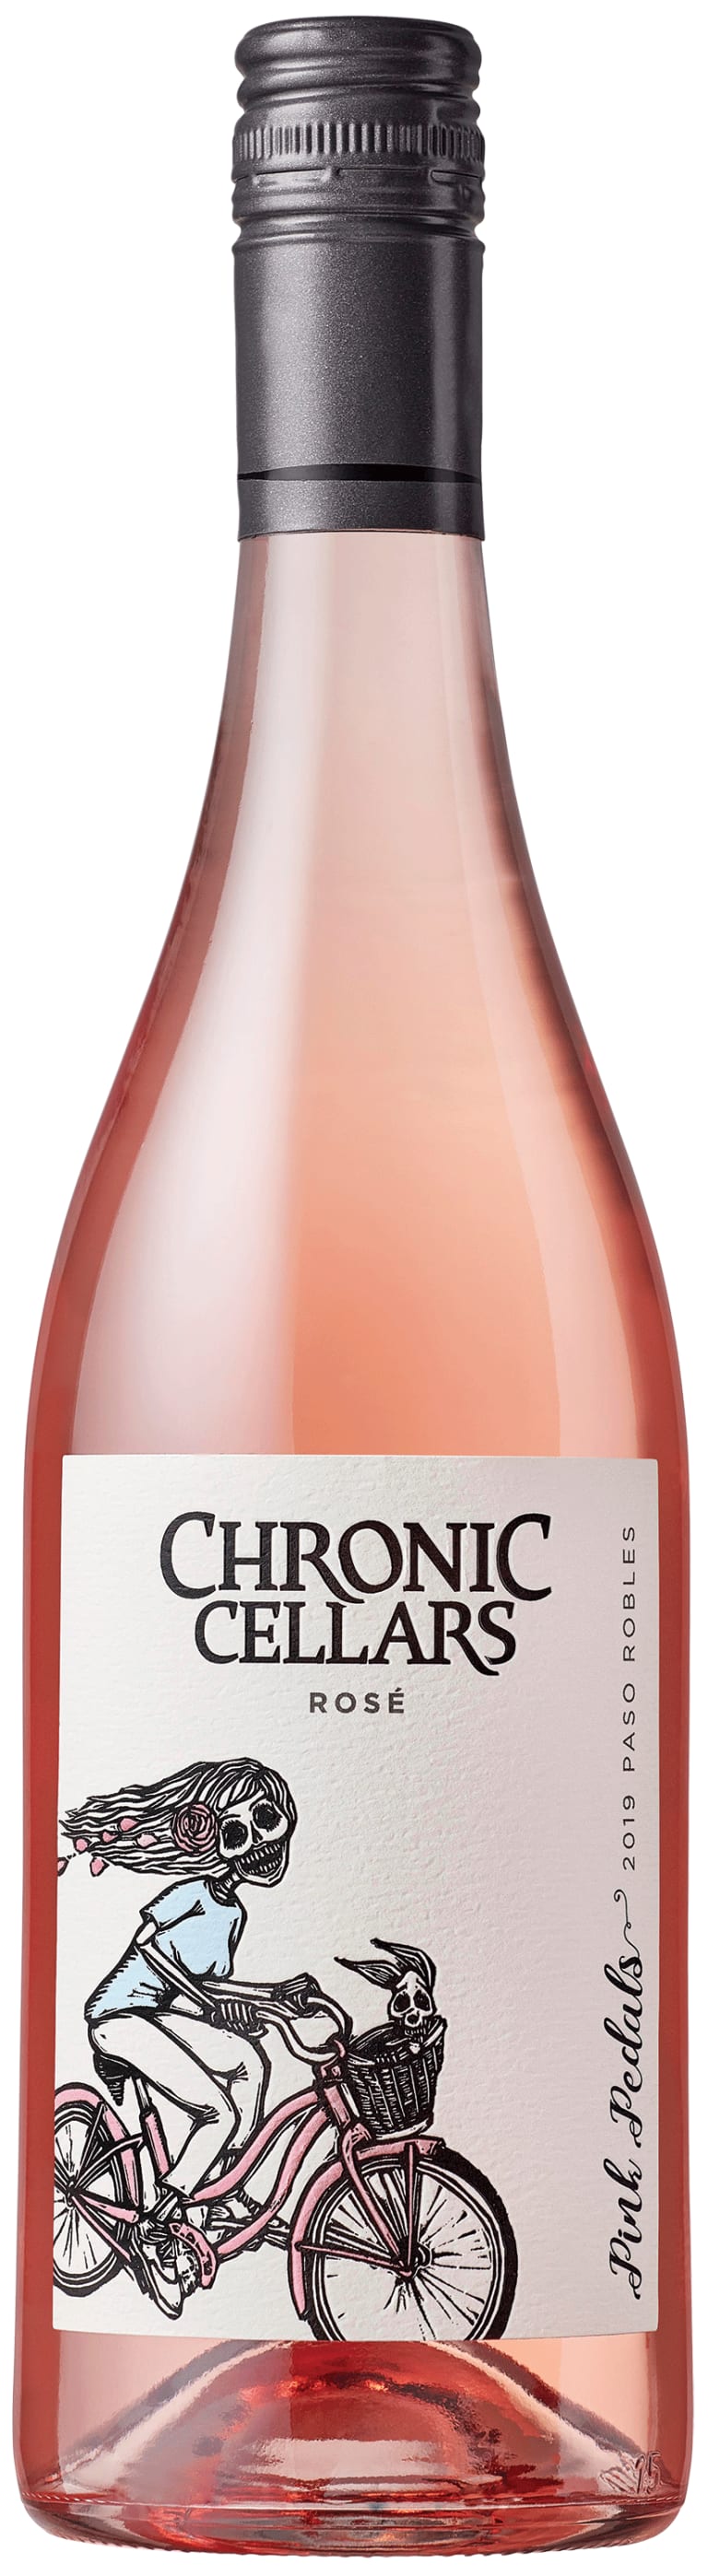 Chronic Cellars Pink Pedals 2019